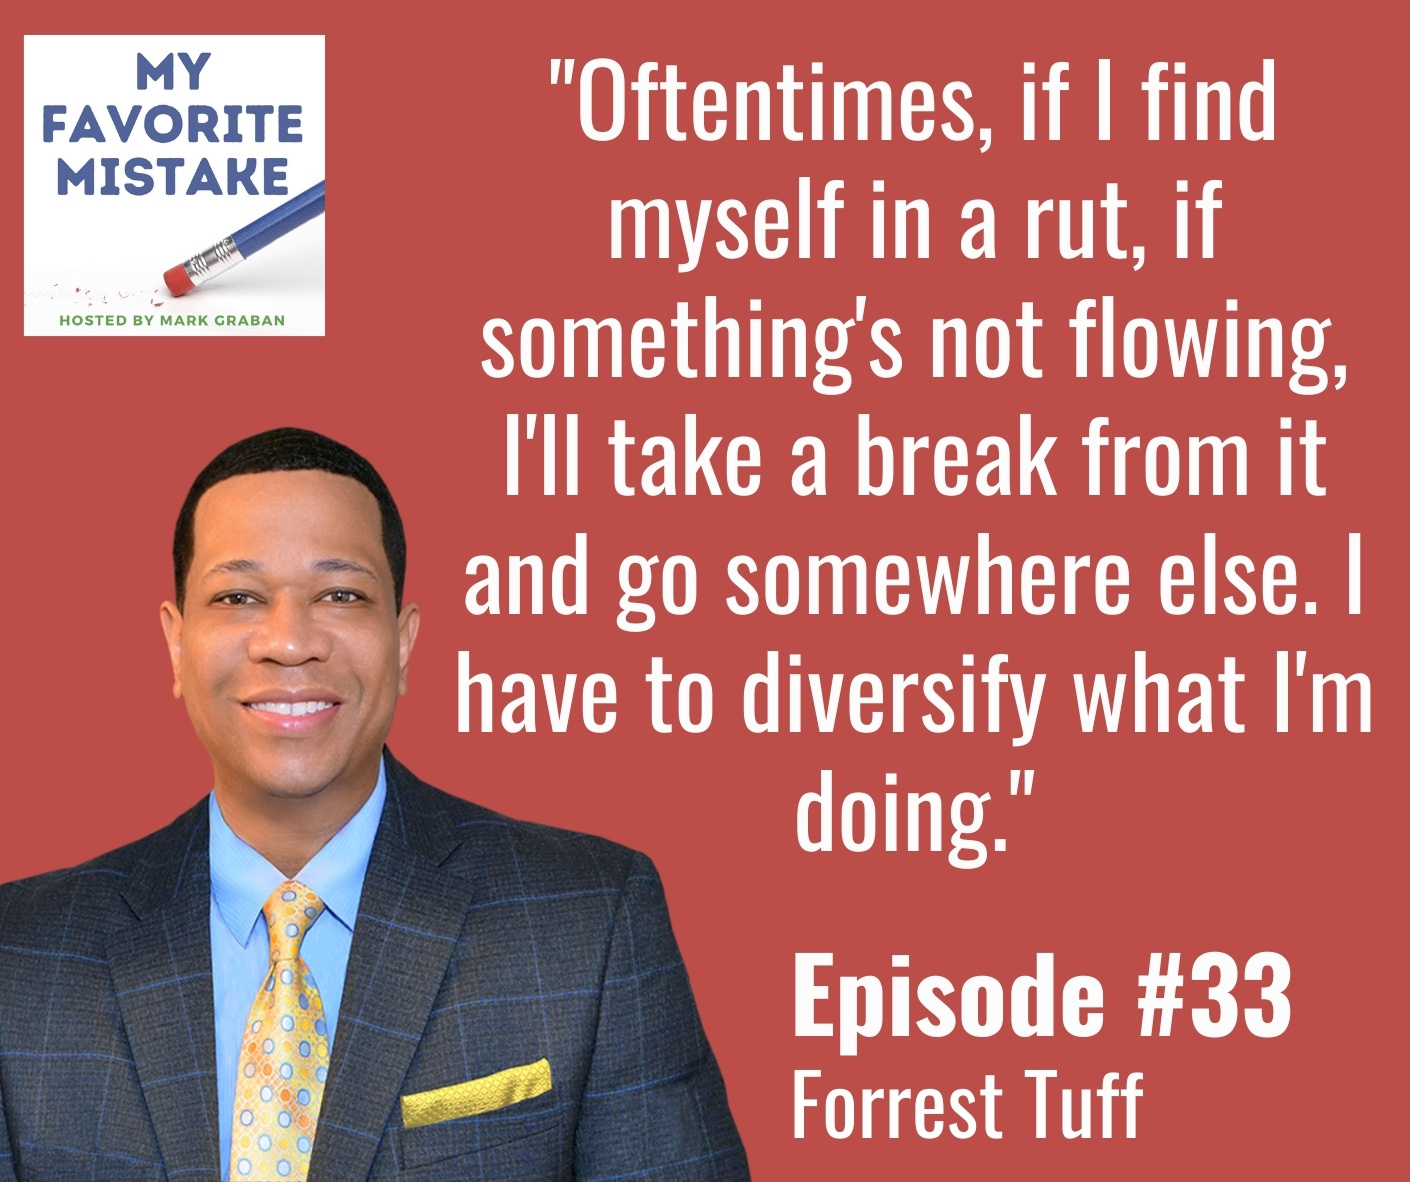 "Oftentimes, if I find myself in a rut, if something's not flowing, I'll take a break from it and go somewhere else. I have to diversify what I'm doing."